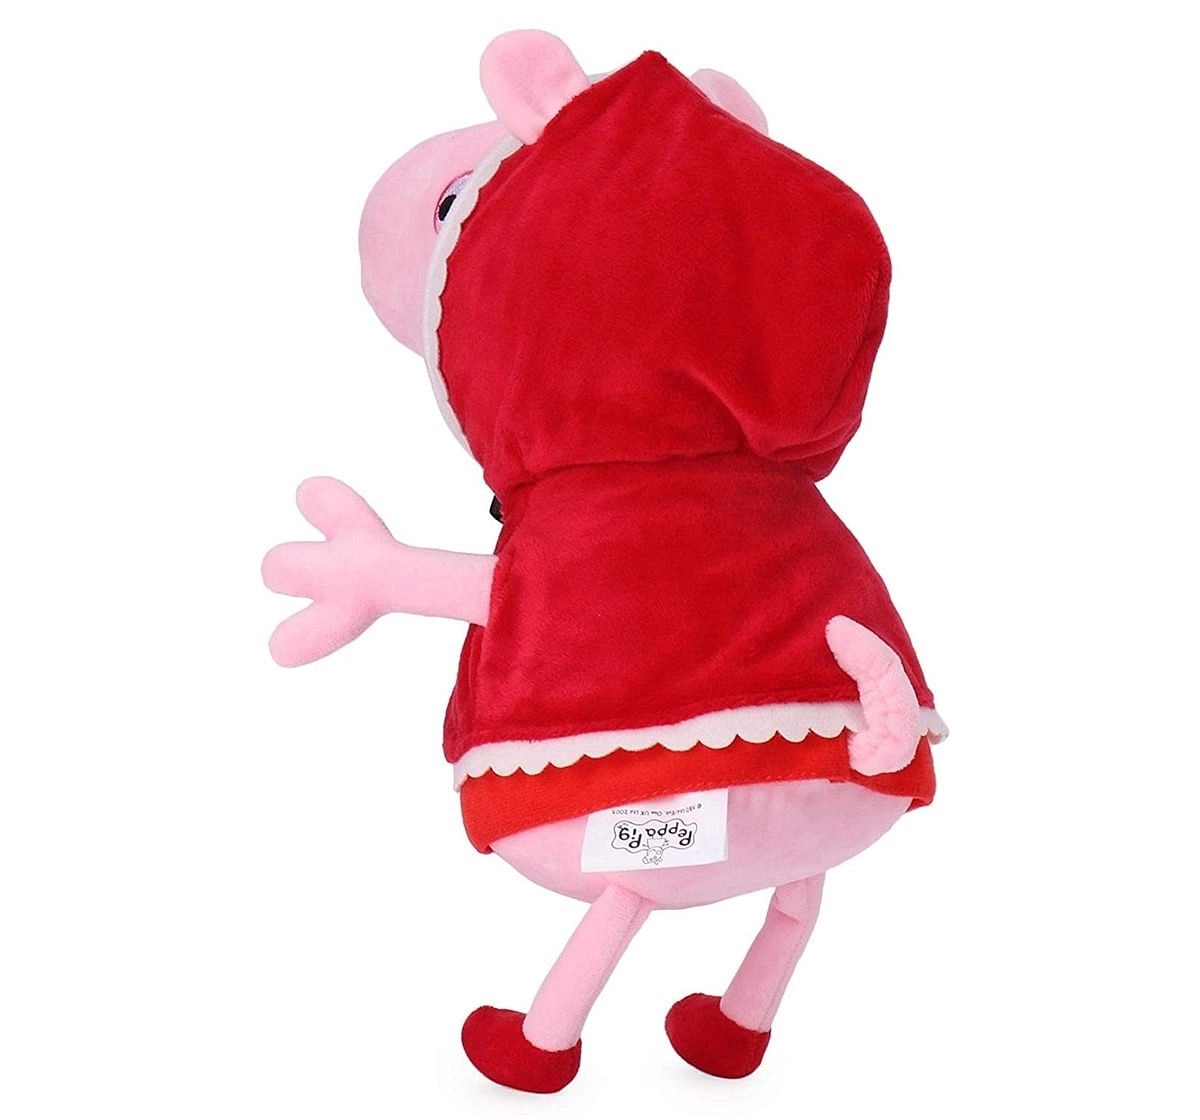  Peppa Pig In Little Red Riding Hood Costume for age 1Y+ - 30 Cm 